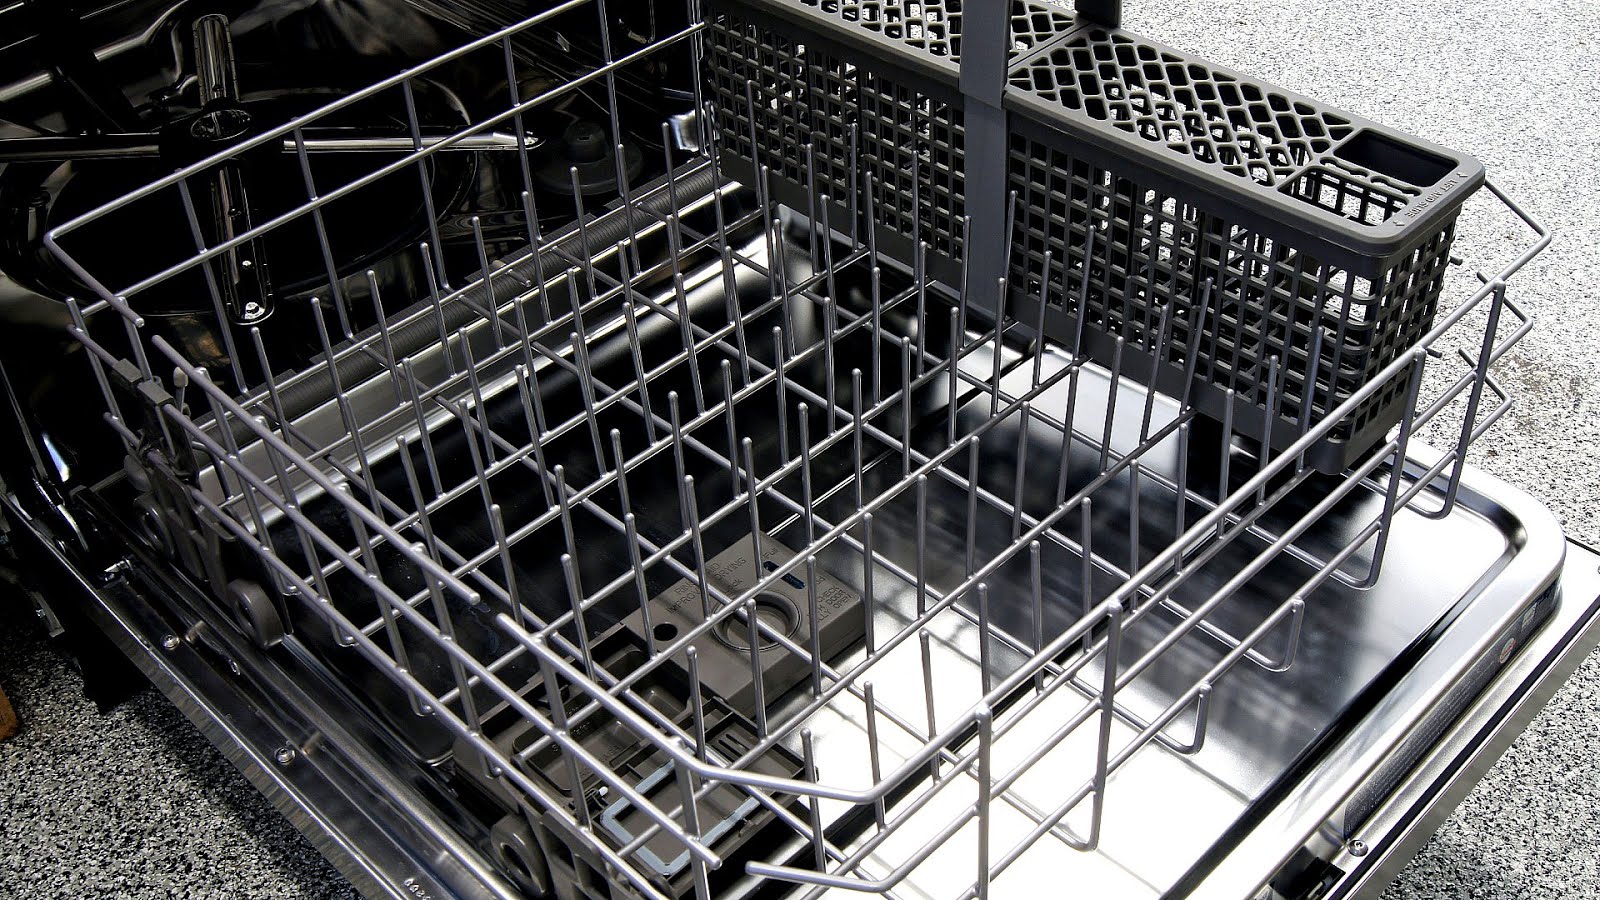 Ge Profile Dishwasher Will Not Drain - Dish Choices